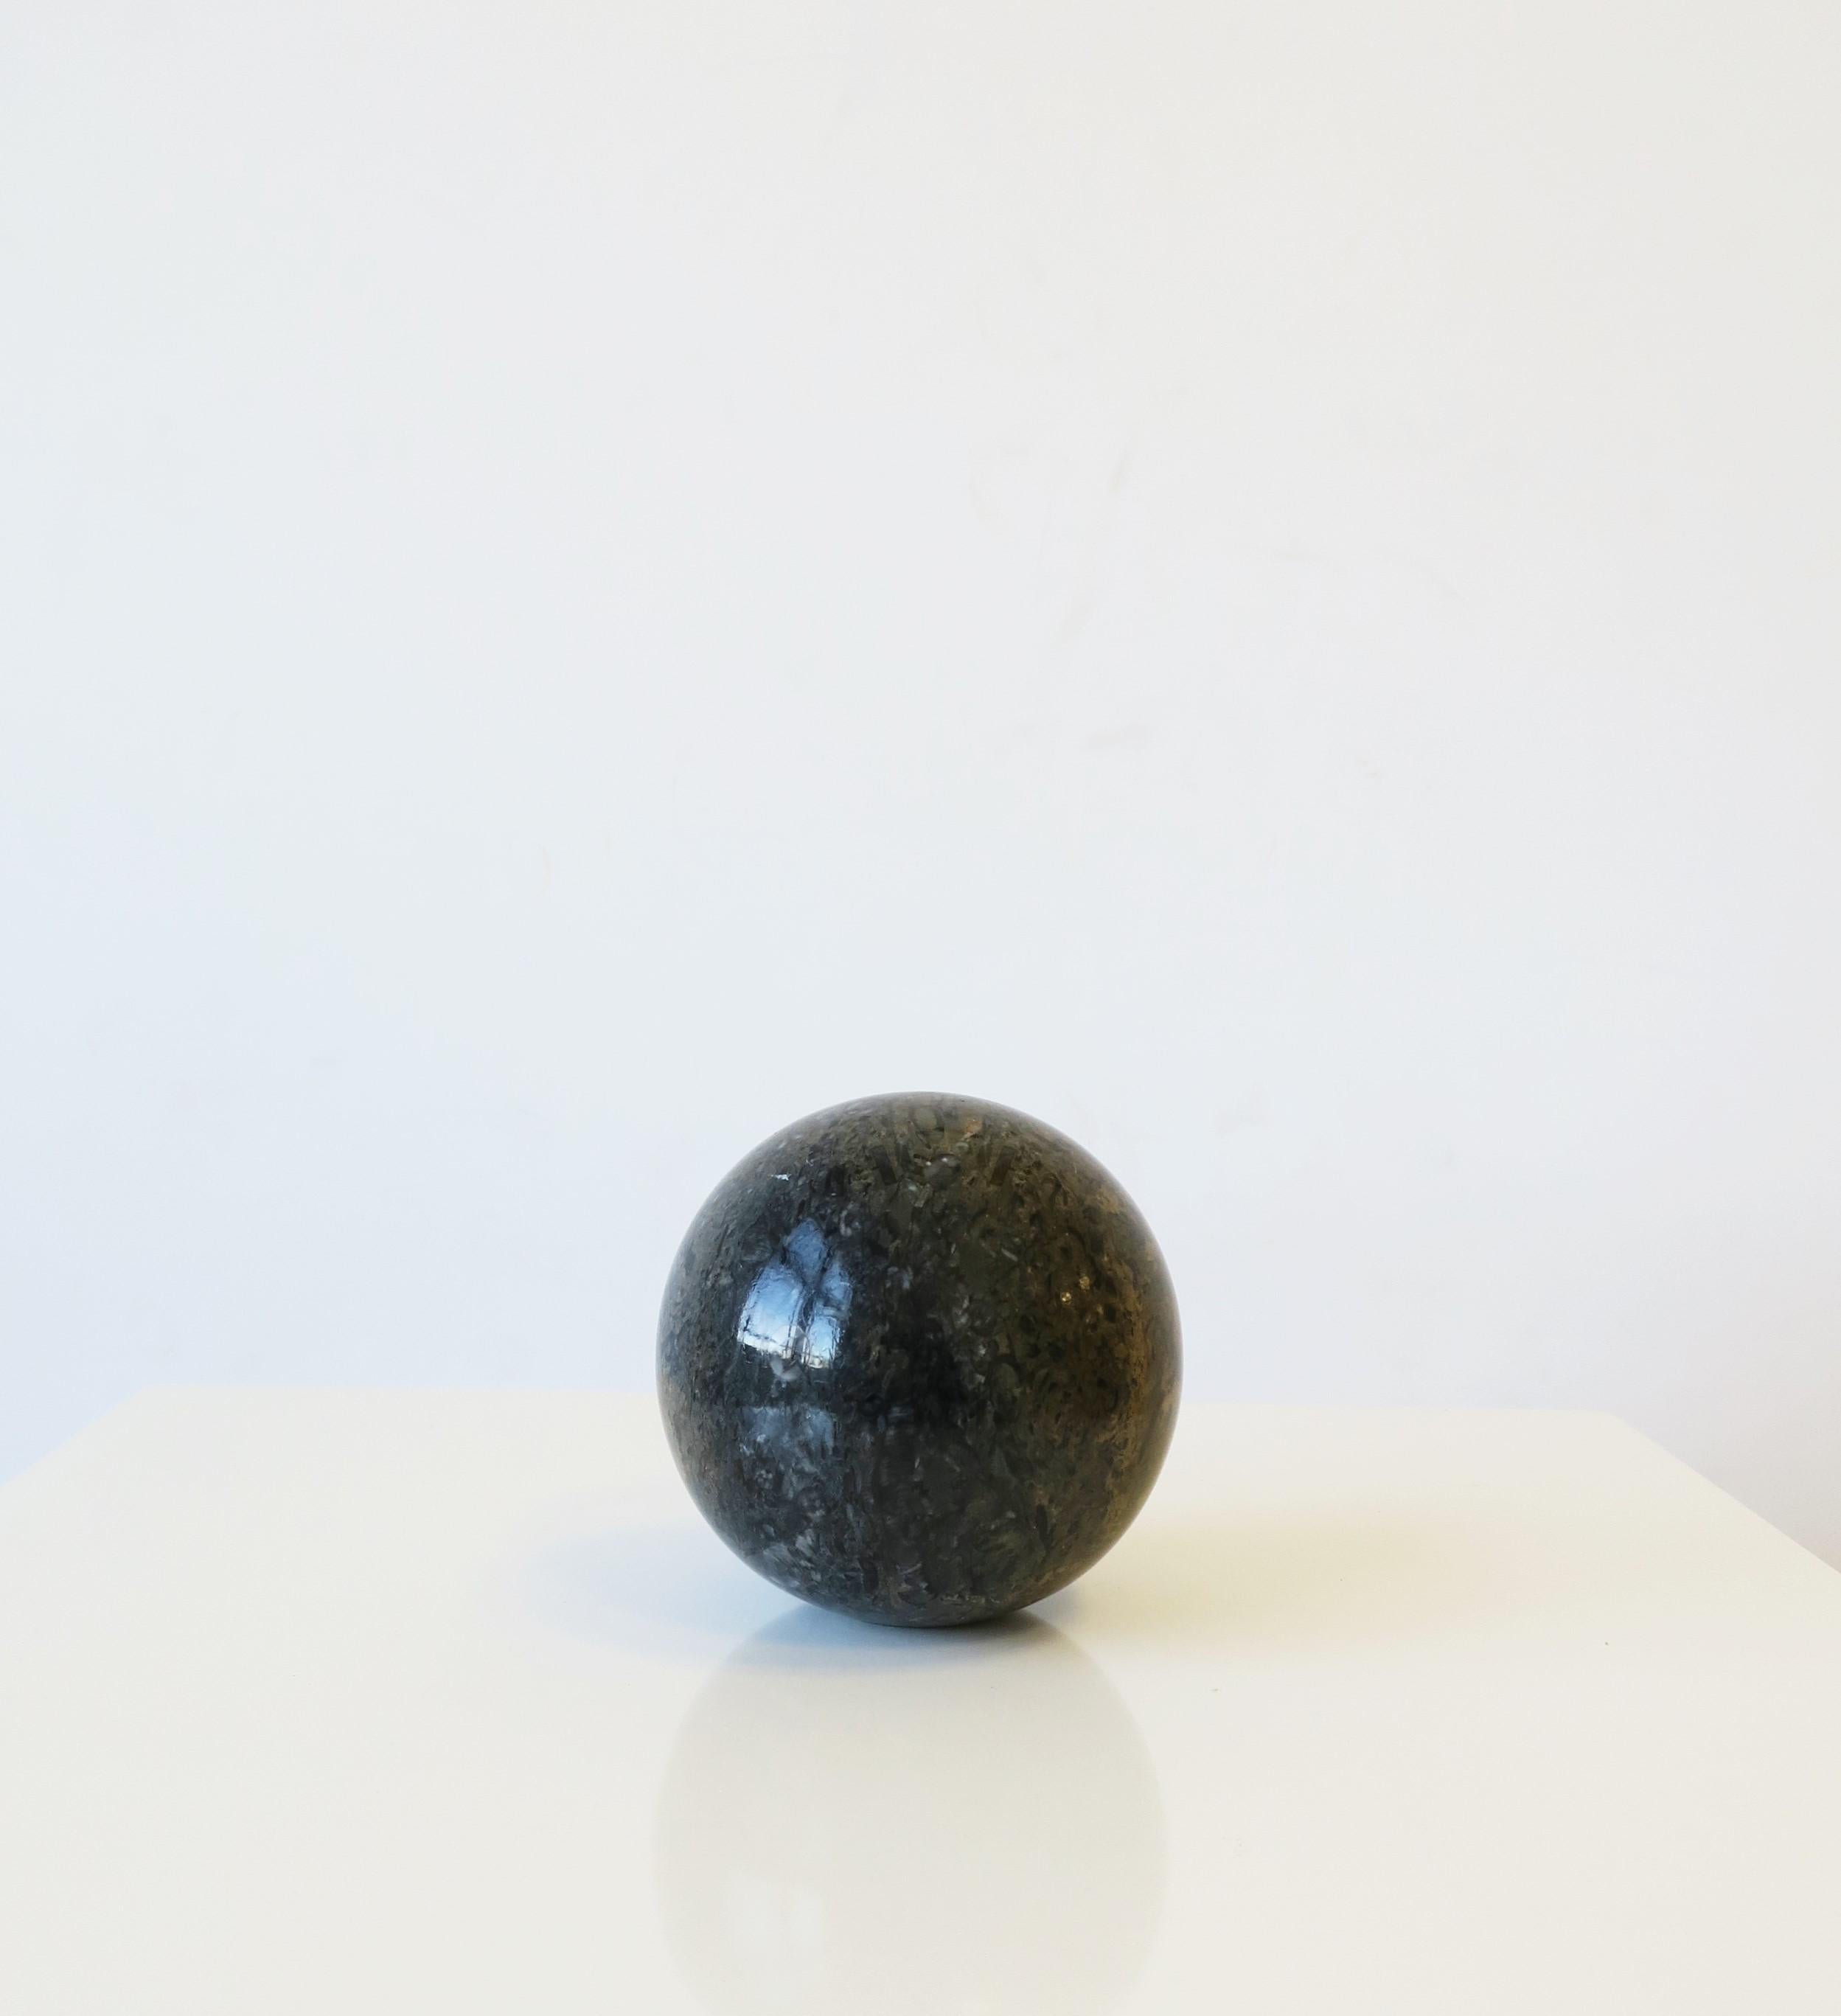 Polished Modern Art Deco Marble Sphere Black and other Hues, circa 1970s